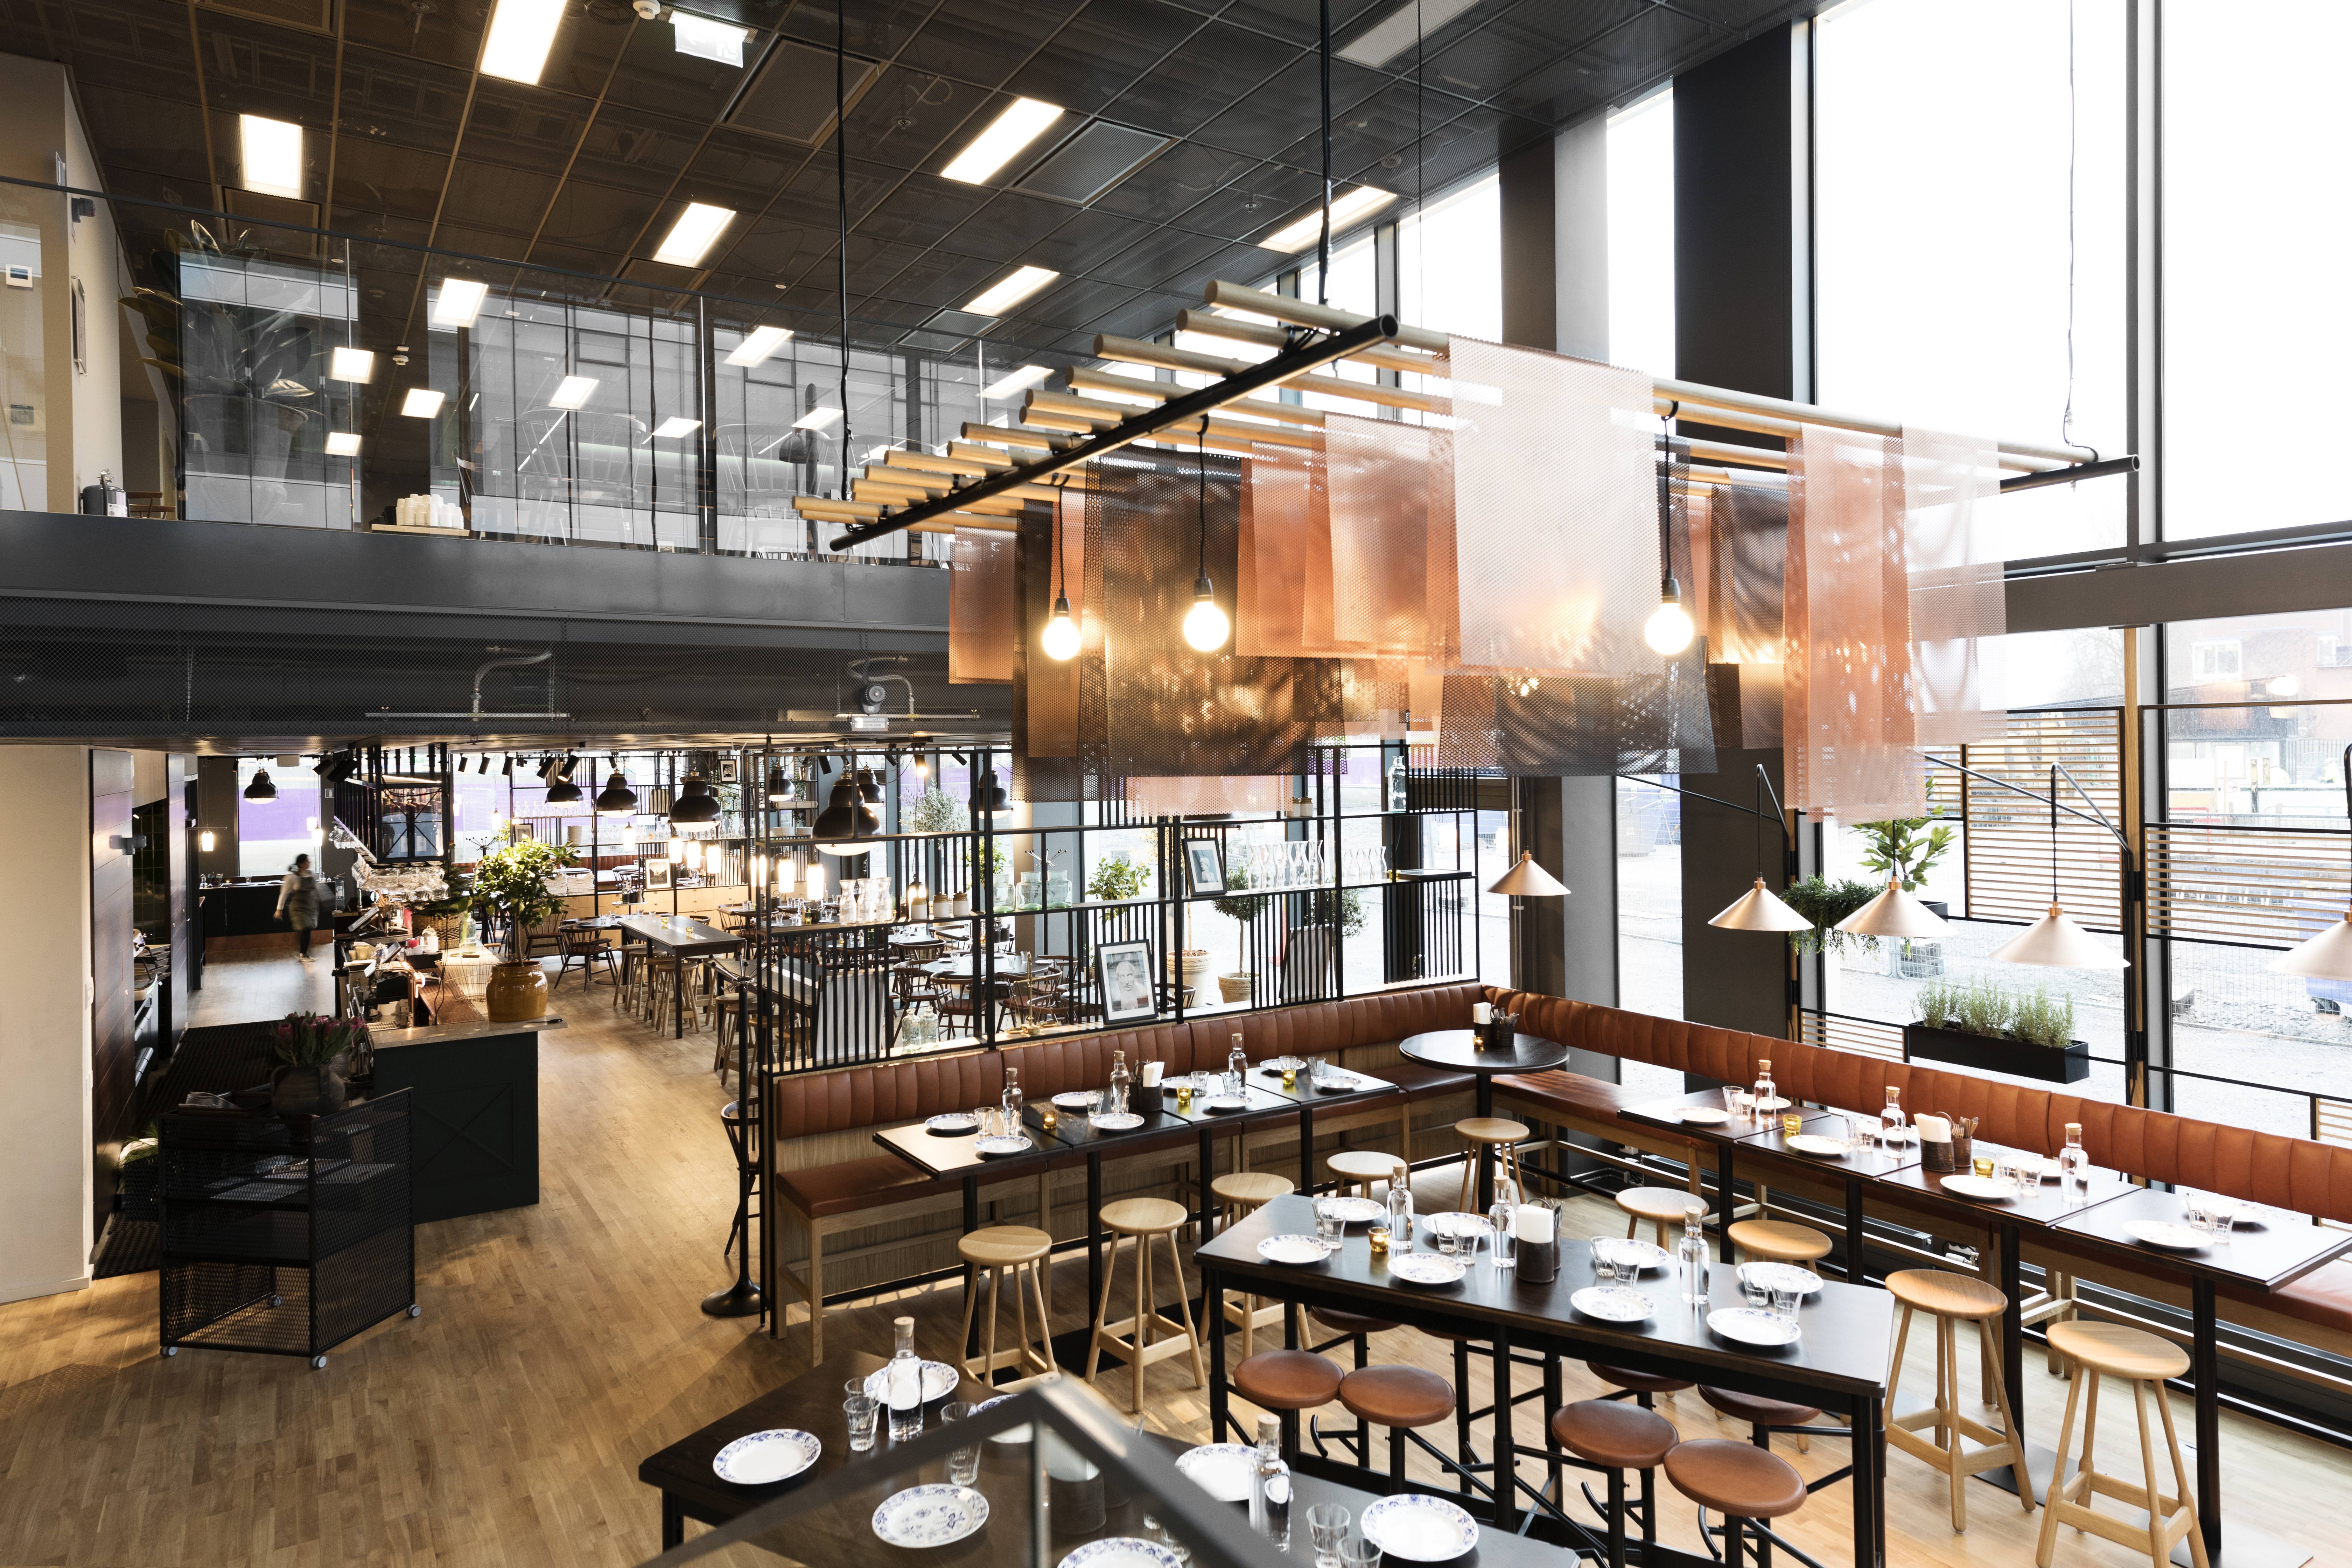 Hotel restaurant with an industrial interior